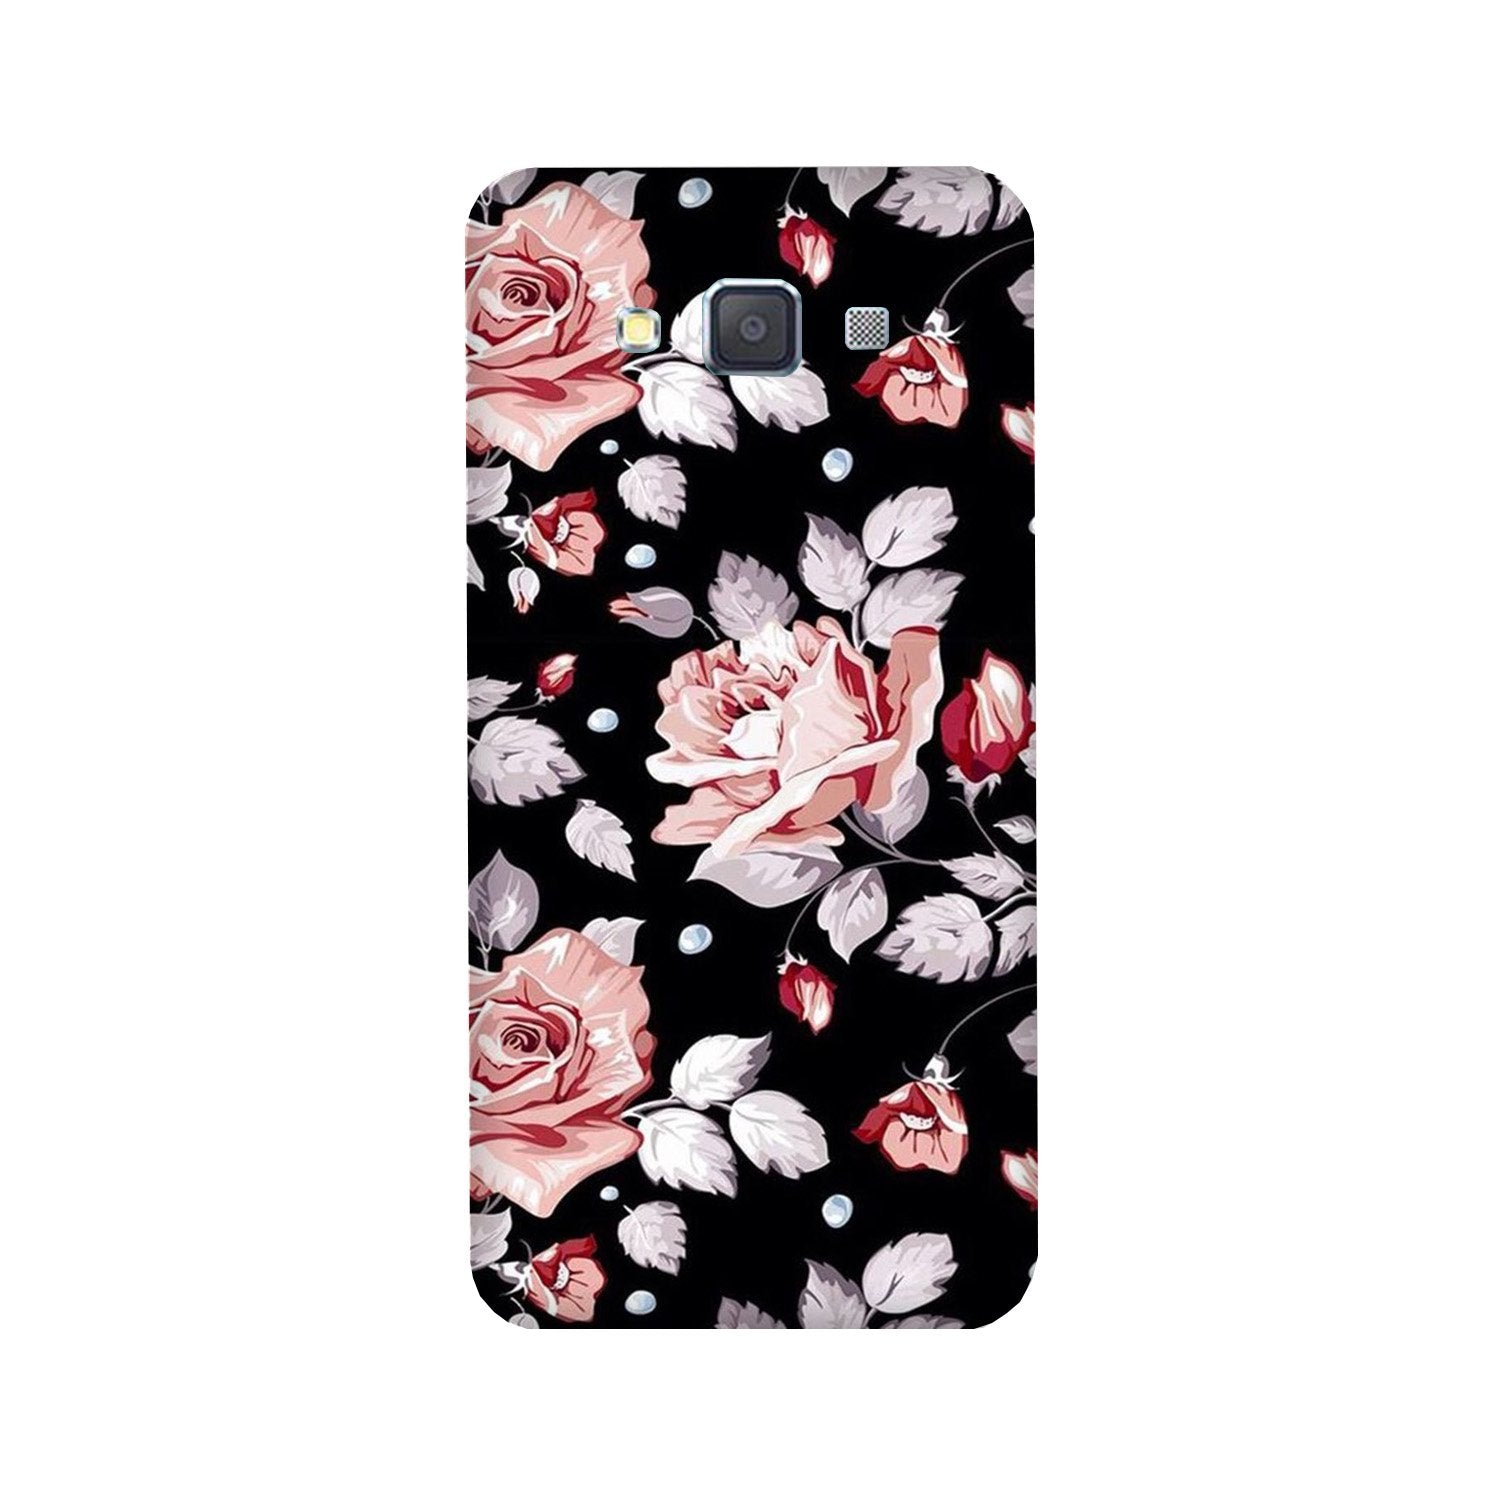 Pink rose Case for Galaxy Grand Max